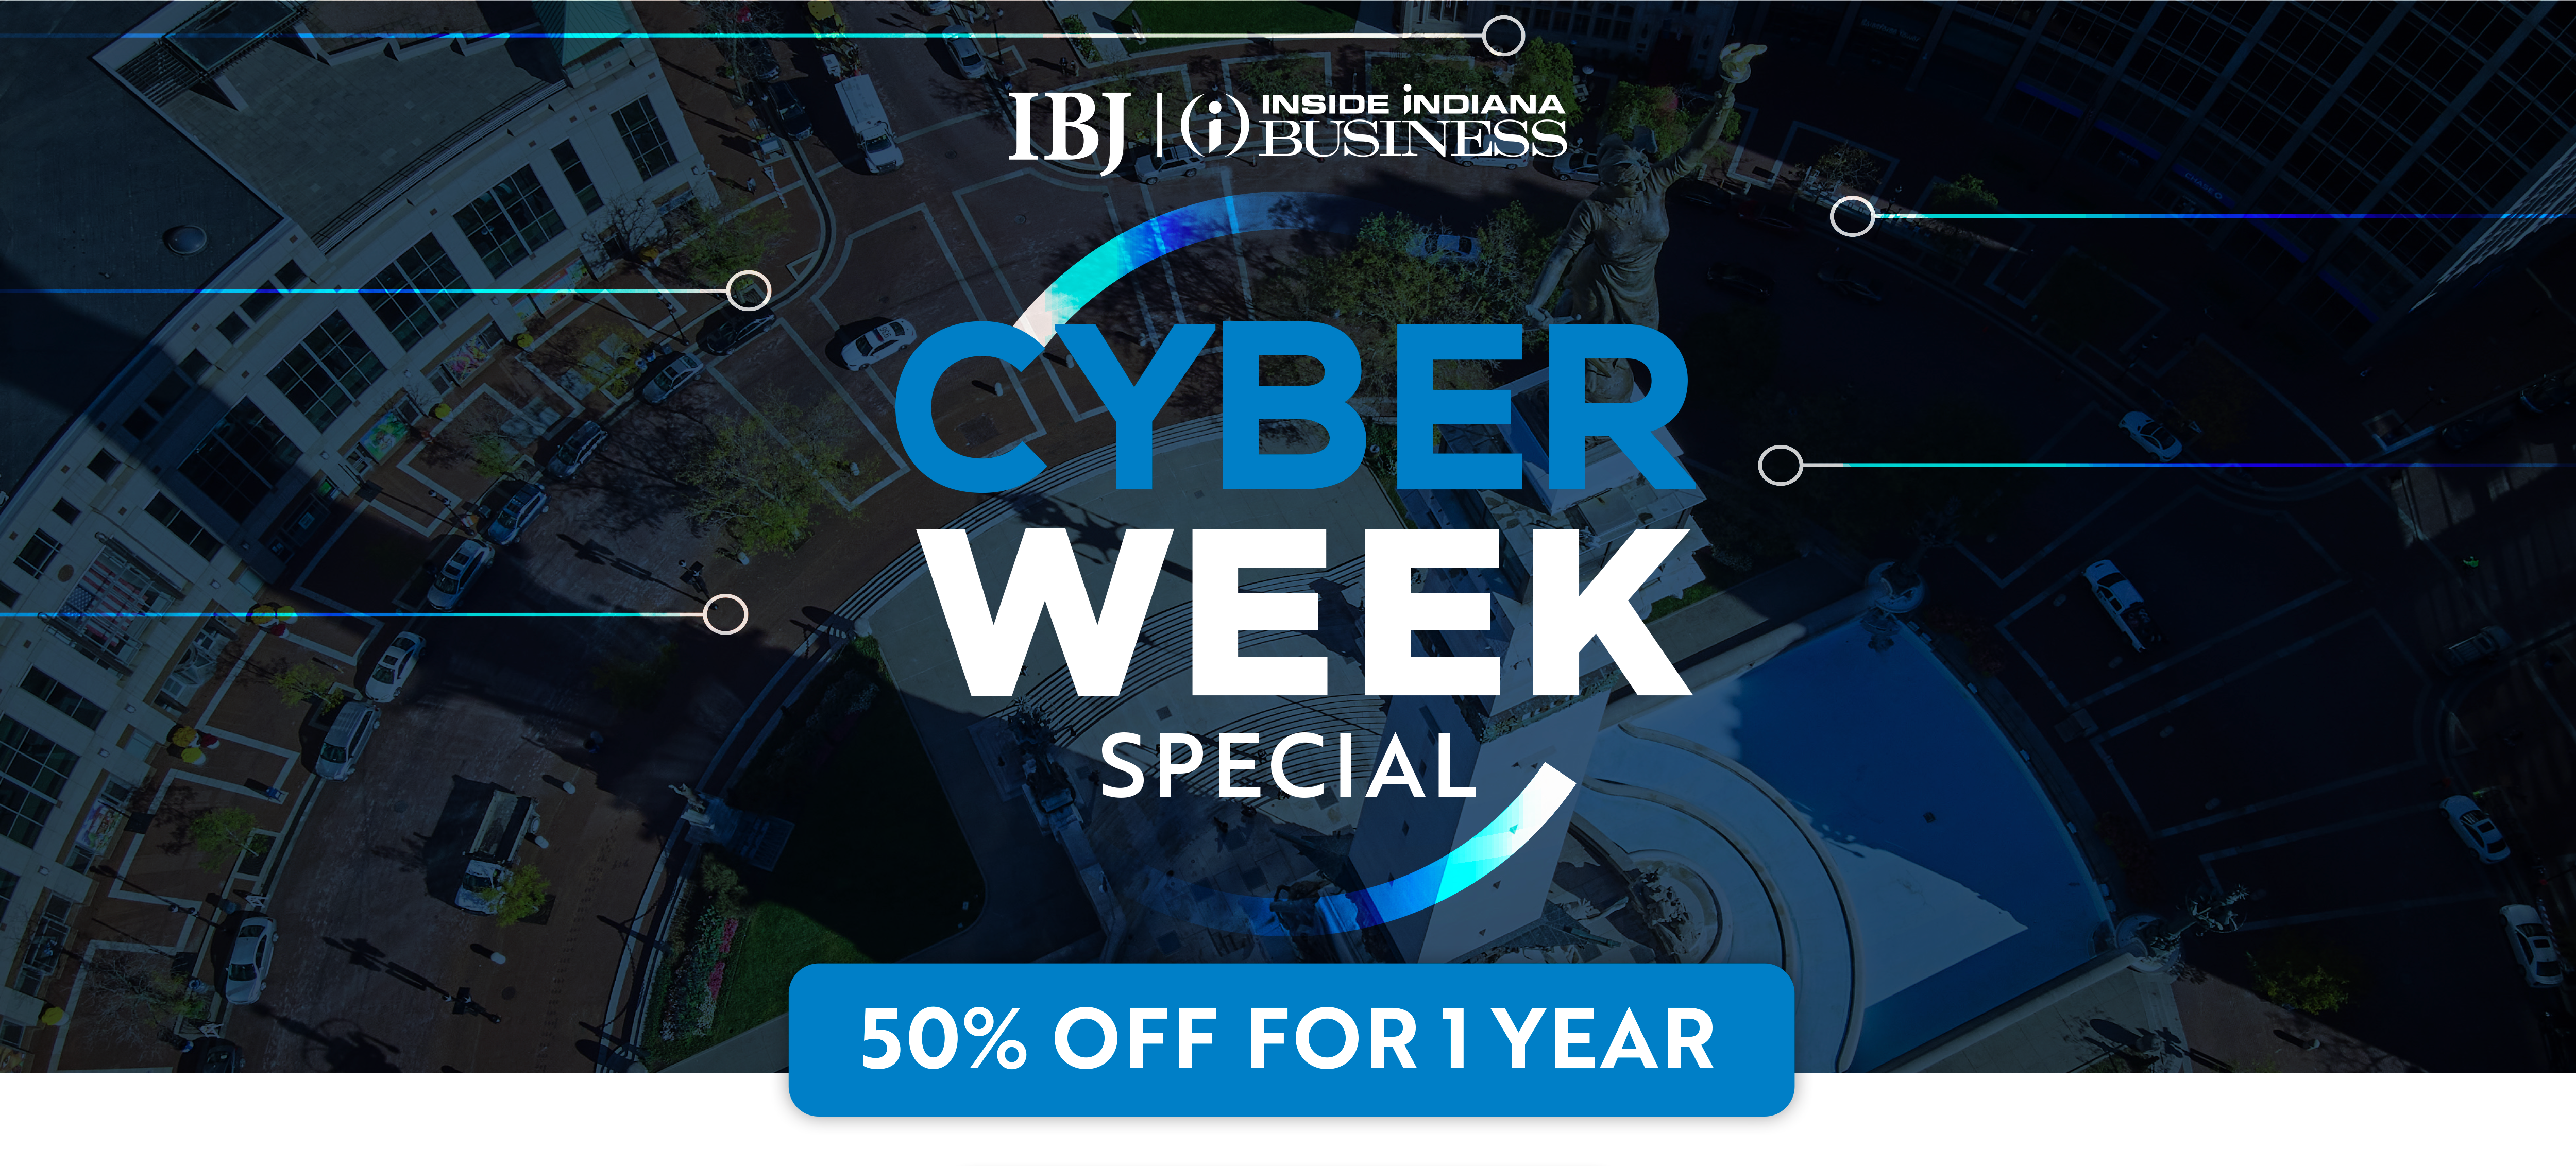 IBJ, Inside Indiana Business, Cyber Week Special, Fifty percent off for one year.